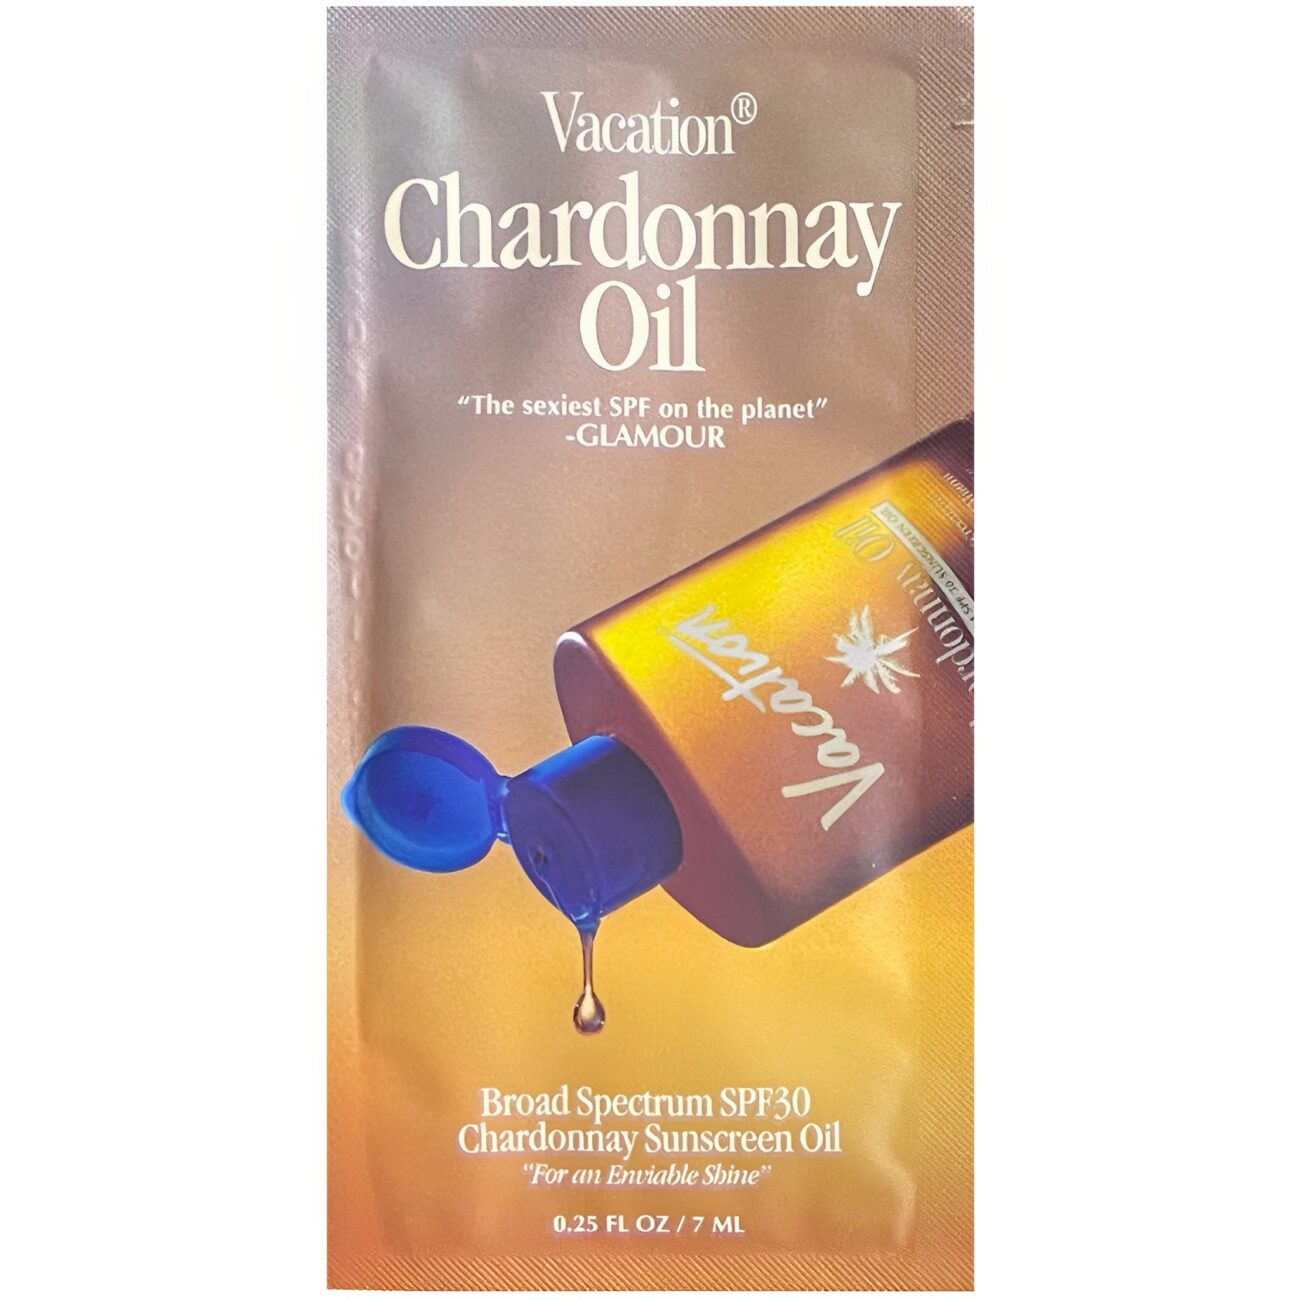 Chardonnay SPF 30 Sunscreen Oil Packette-Vacation